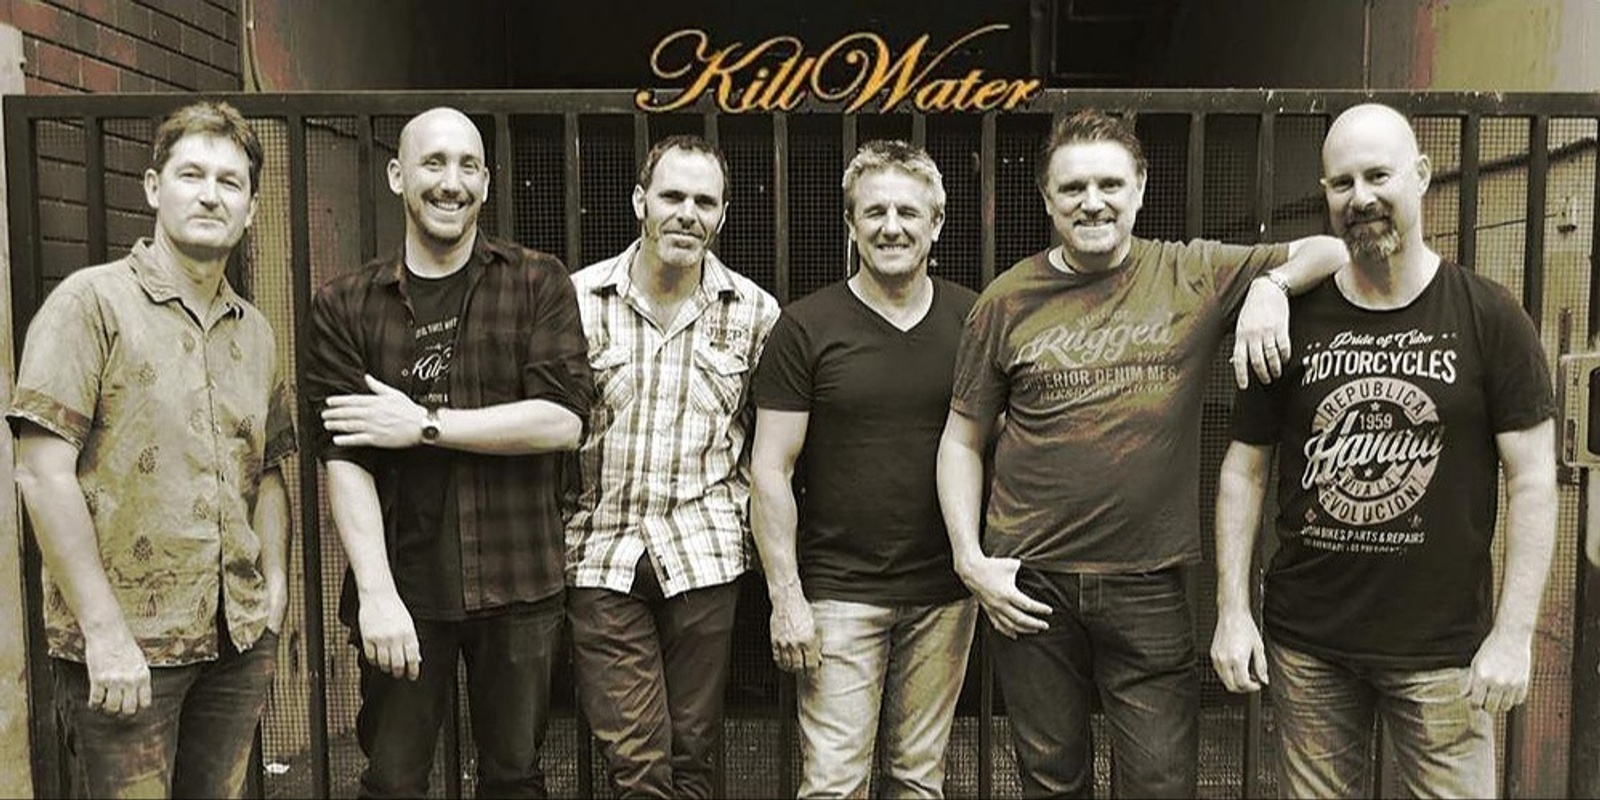 Banner image for CBS October Blues Jam hosted by KillWater